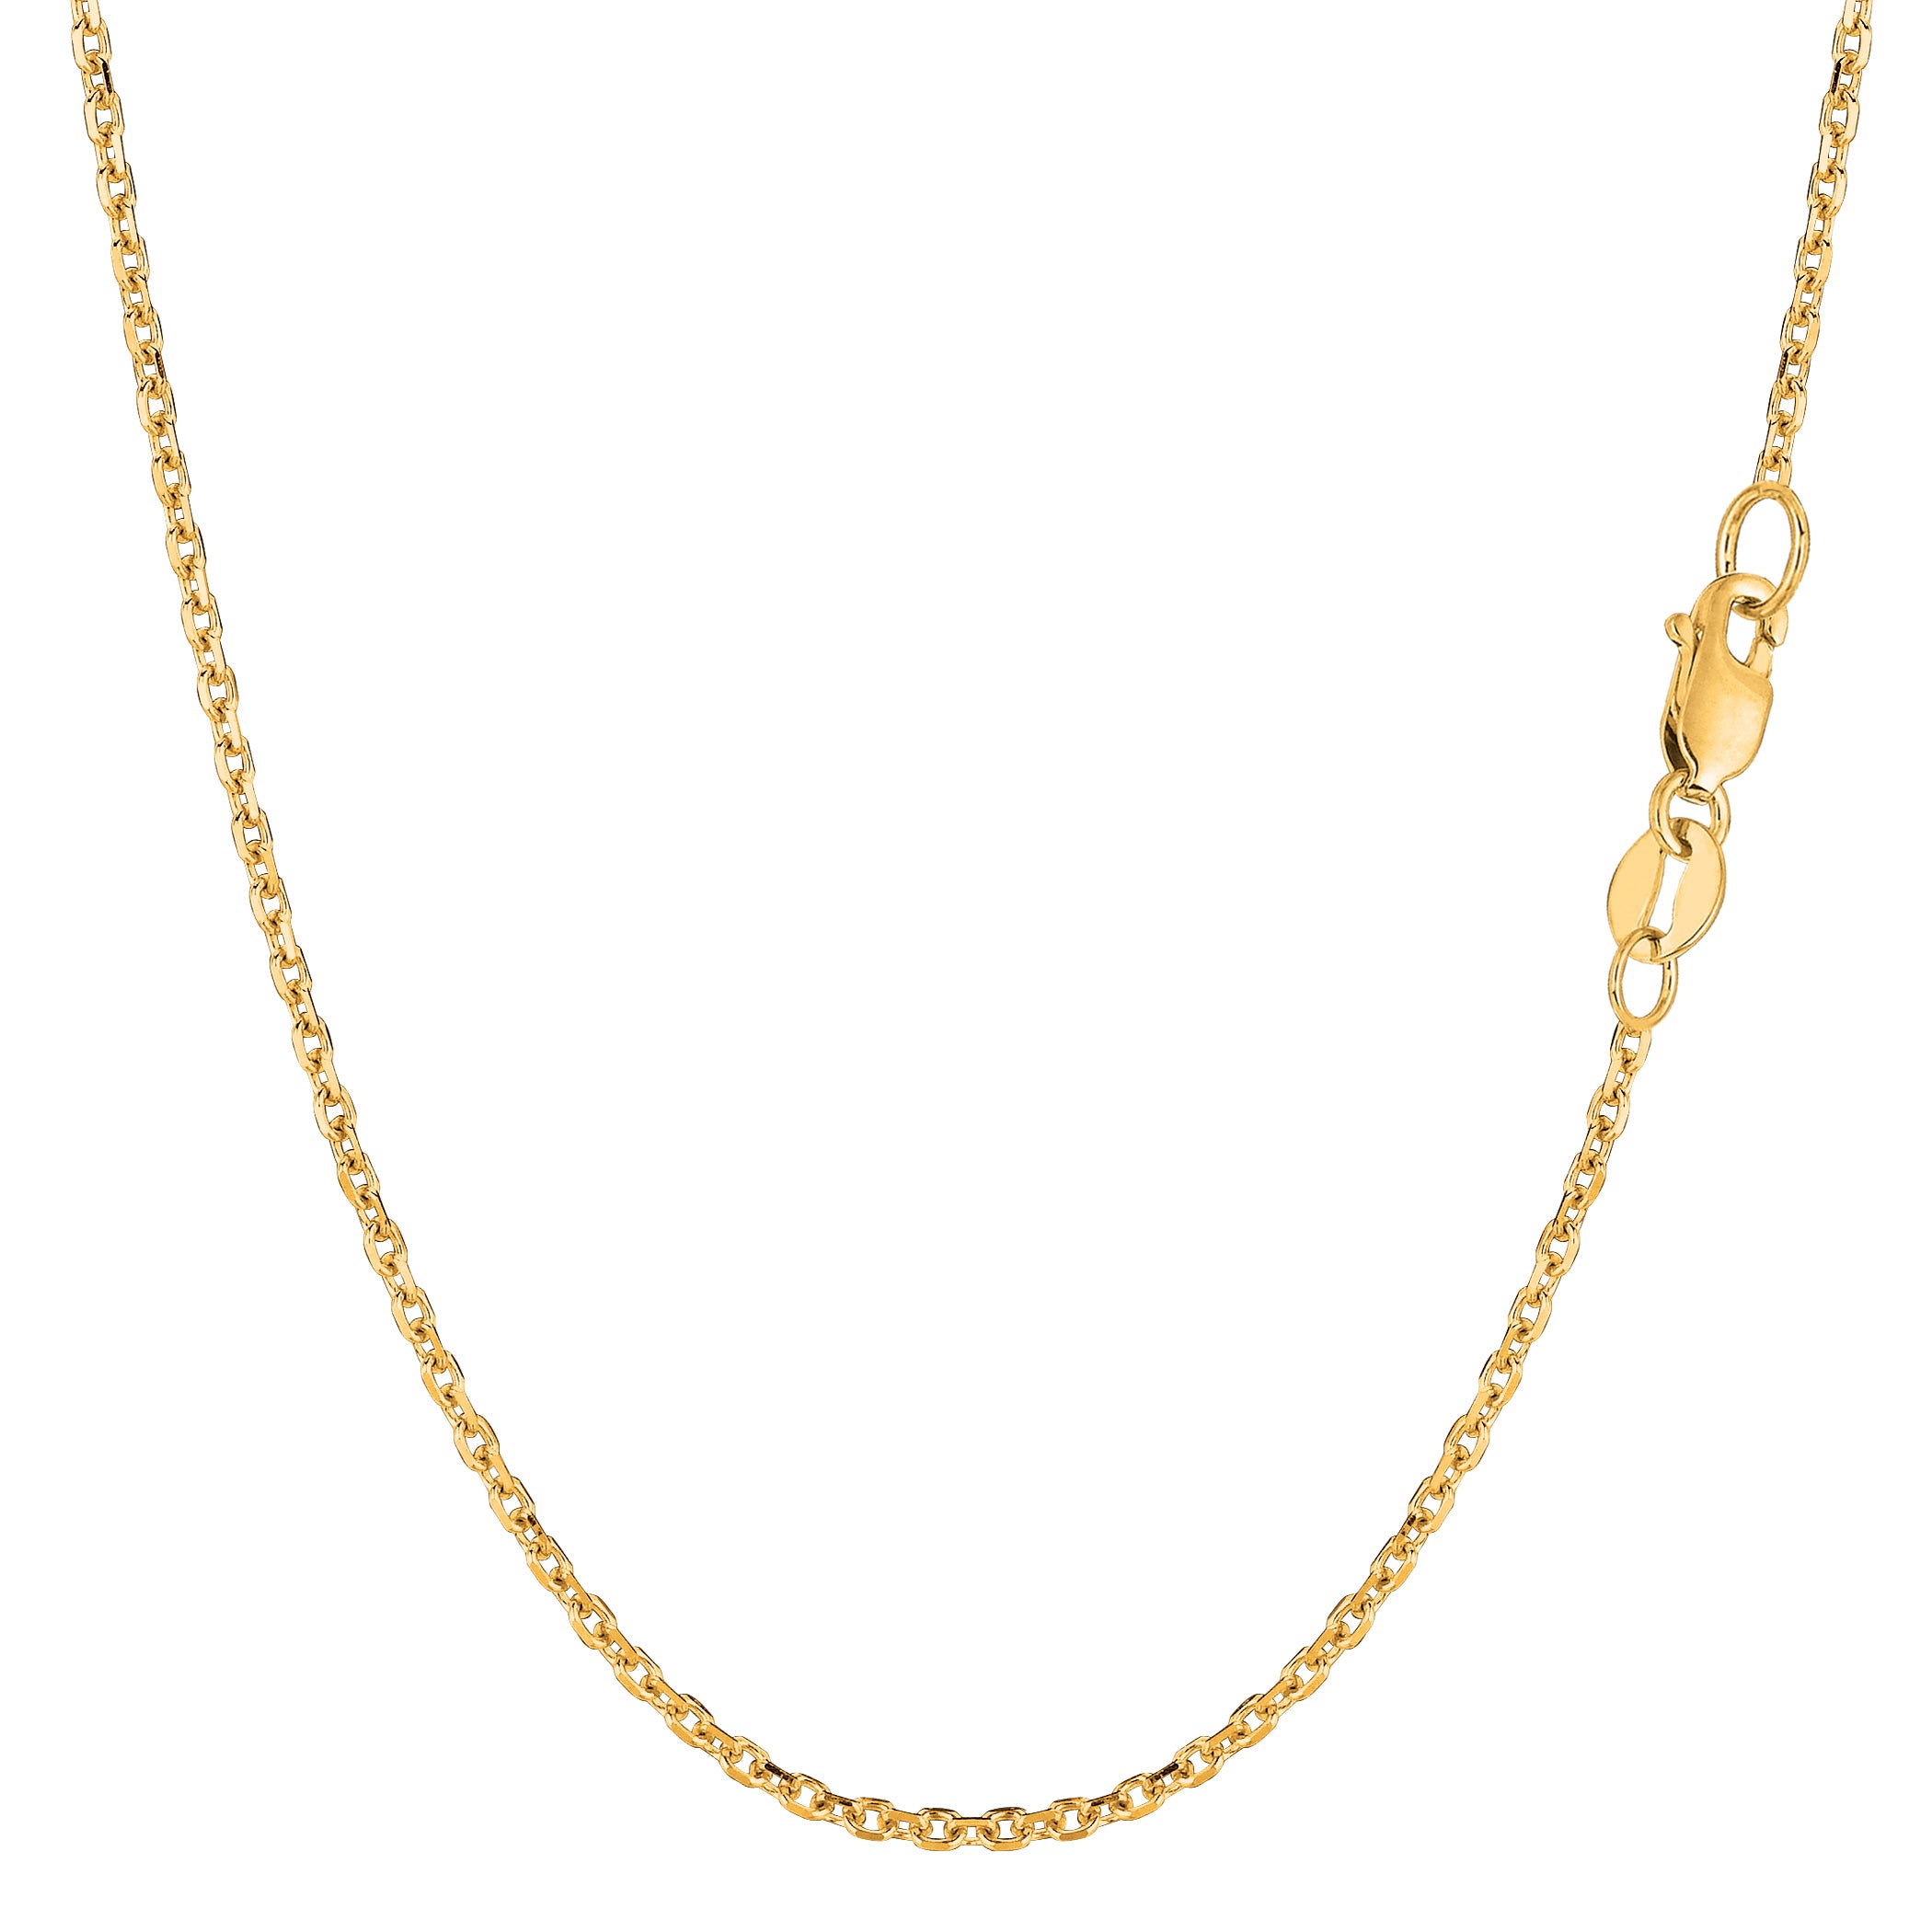 18k Yellow Gold Cable Link Chain Necklace, 1.5mm fine designer jewelry for men and women